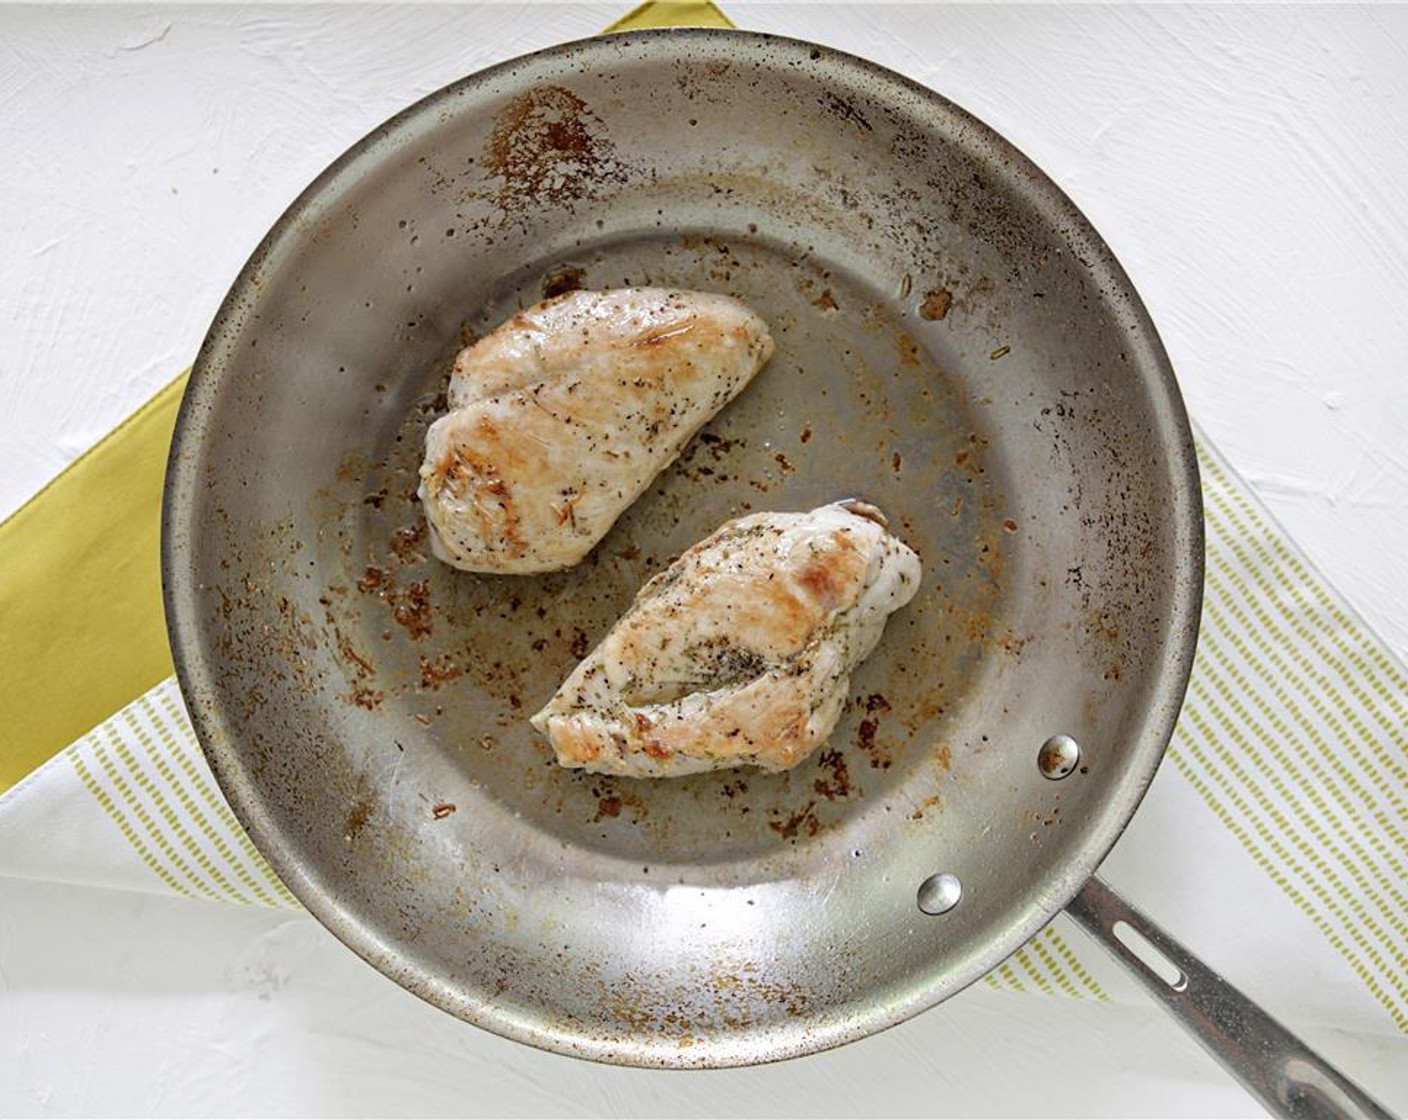 step 5 Heat a large saute pan over medium-high heat, then add 1 tablespoon of Vegetable Oil (3 Tbsp). Cook chicken until browned on first side, then flip and saute until chicken is cooked through. Remove chicken from the pan and set aside.